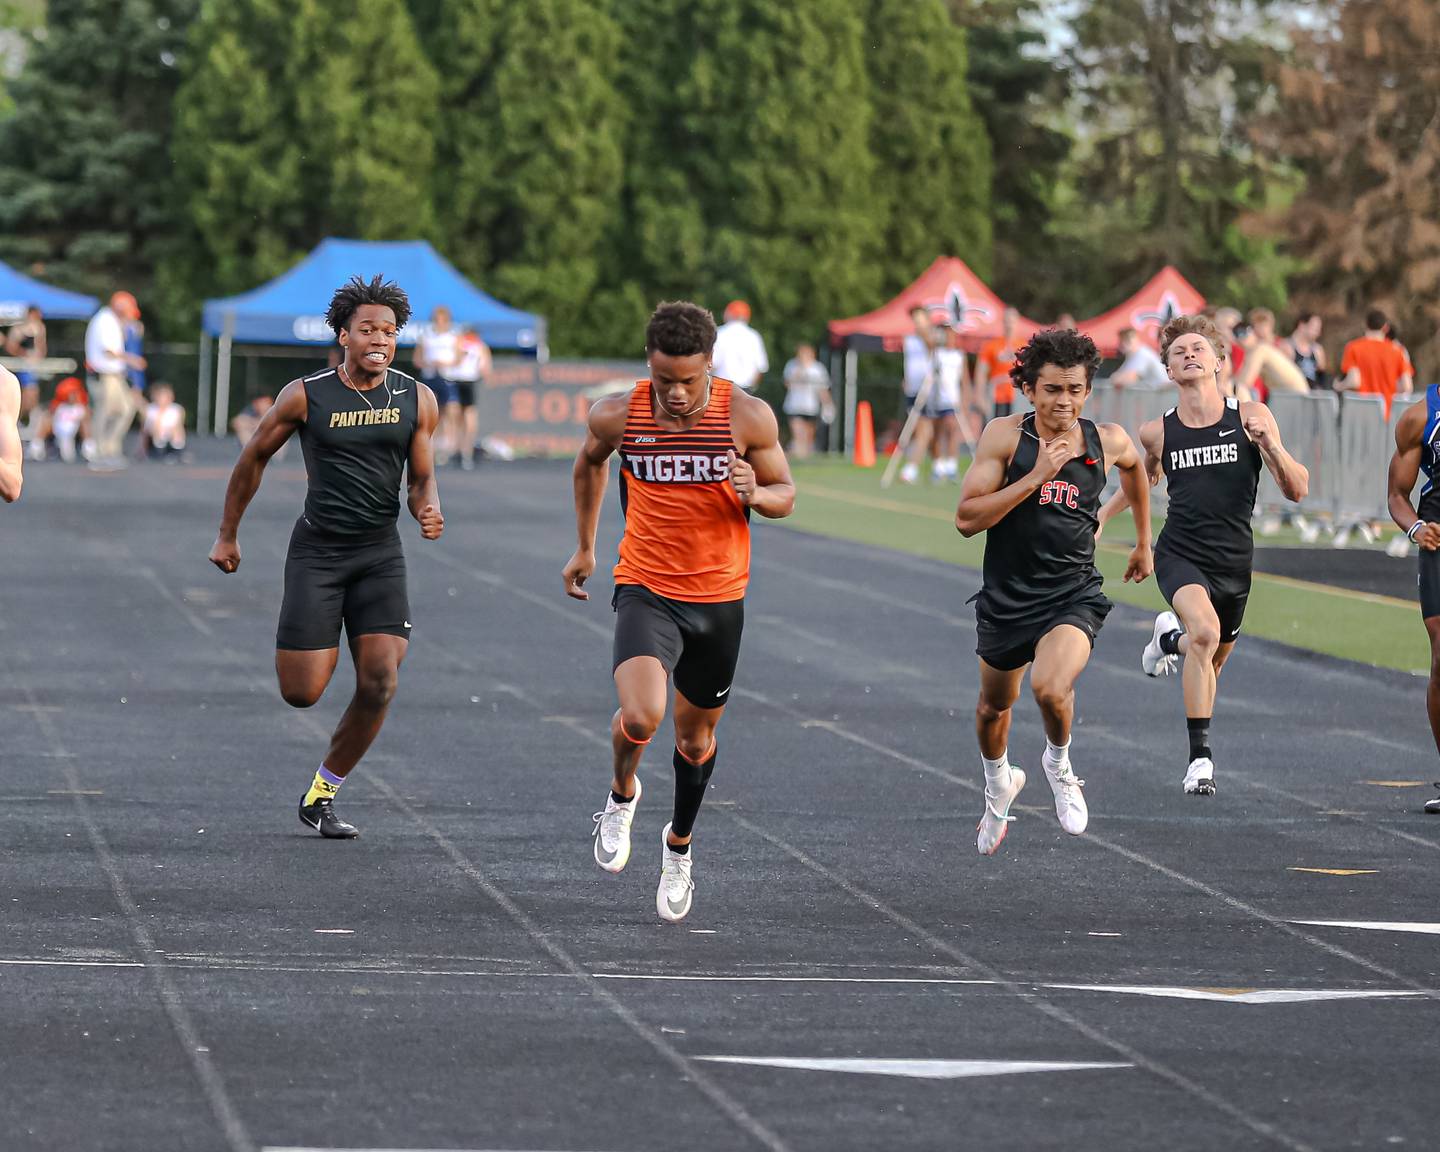 Wheaton Warrenvile South's Reece Young wins the 100m during the DuKane Conference Track and Field meet at Wheaton Warrenville South.  May 13.2022.